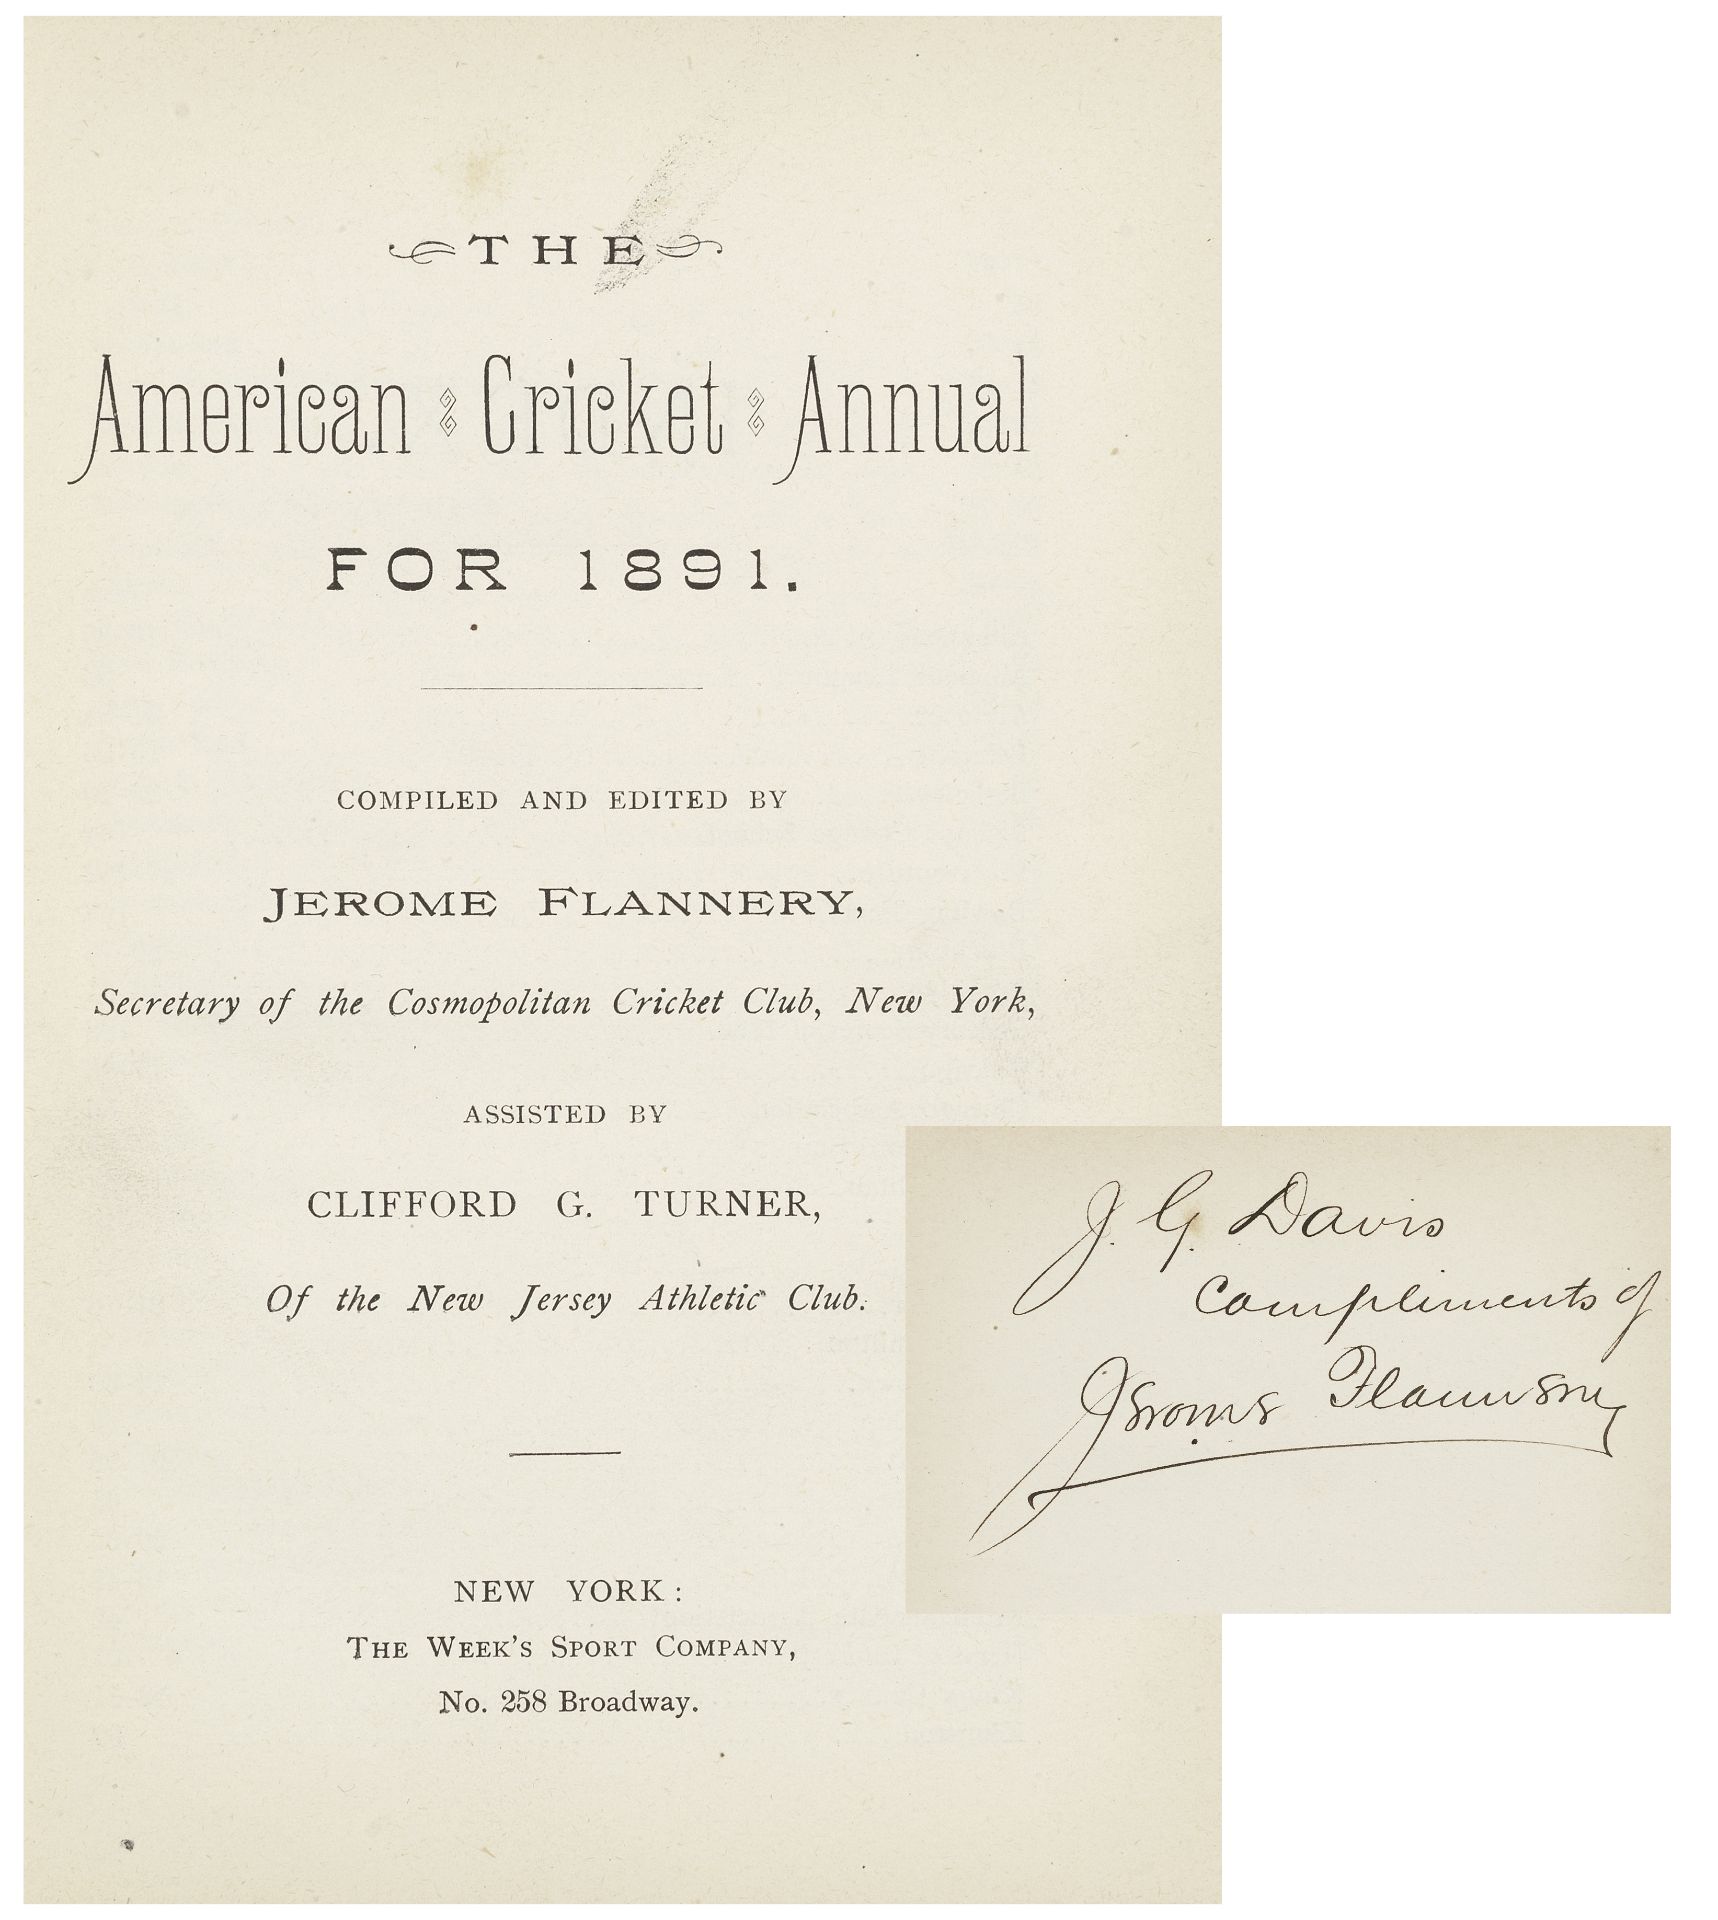 CRICKET FLANNERY (JEROME) The American Cricket Annual for 1891, FIRST EDITION, PRESENTATION COPY ...